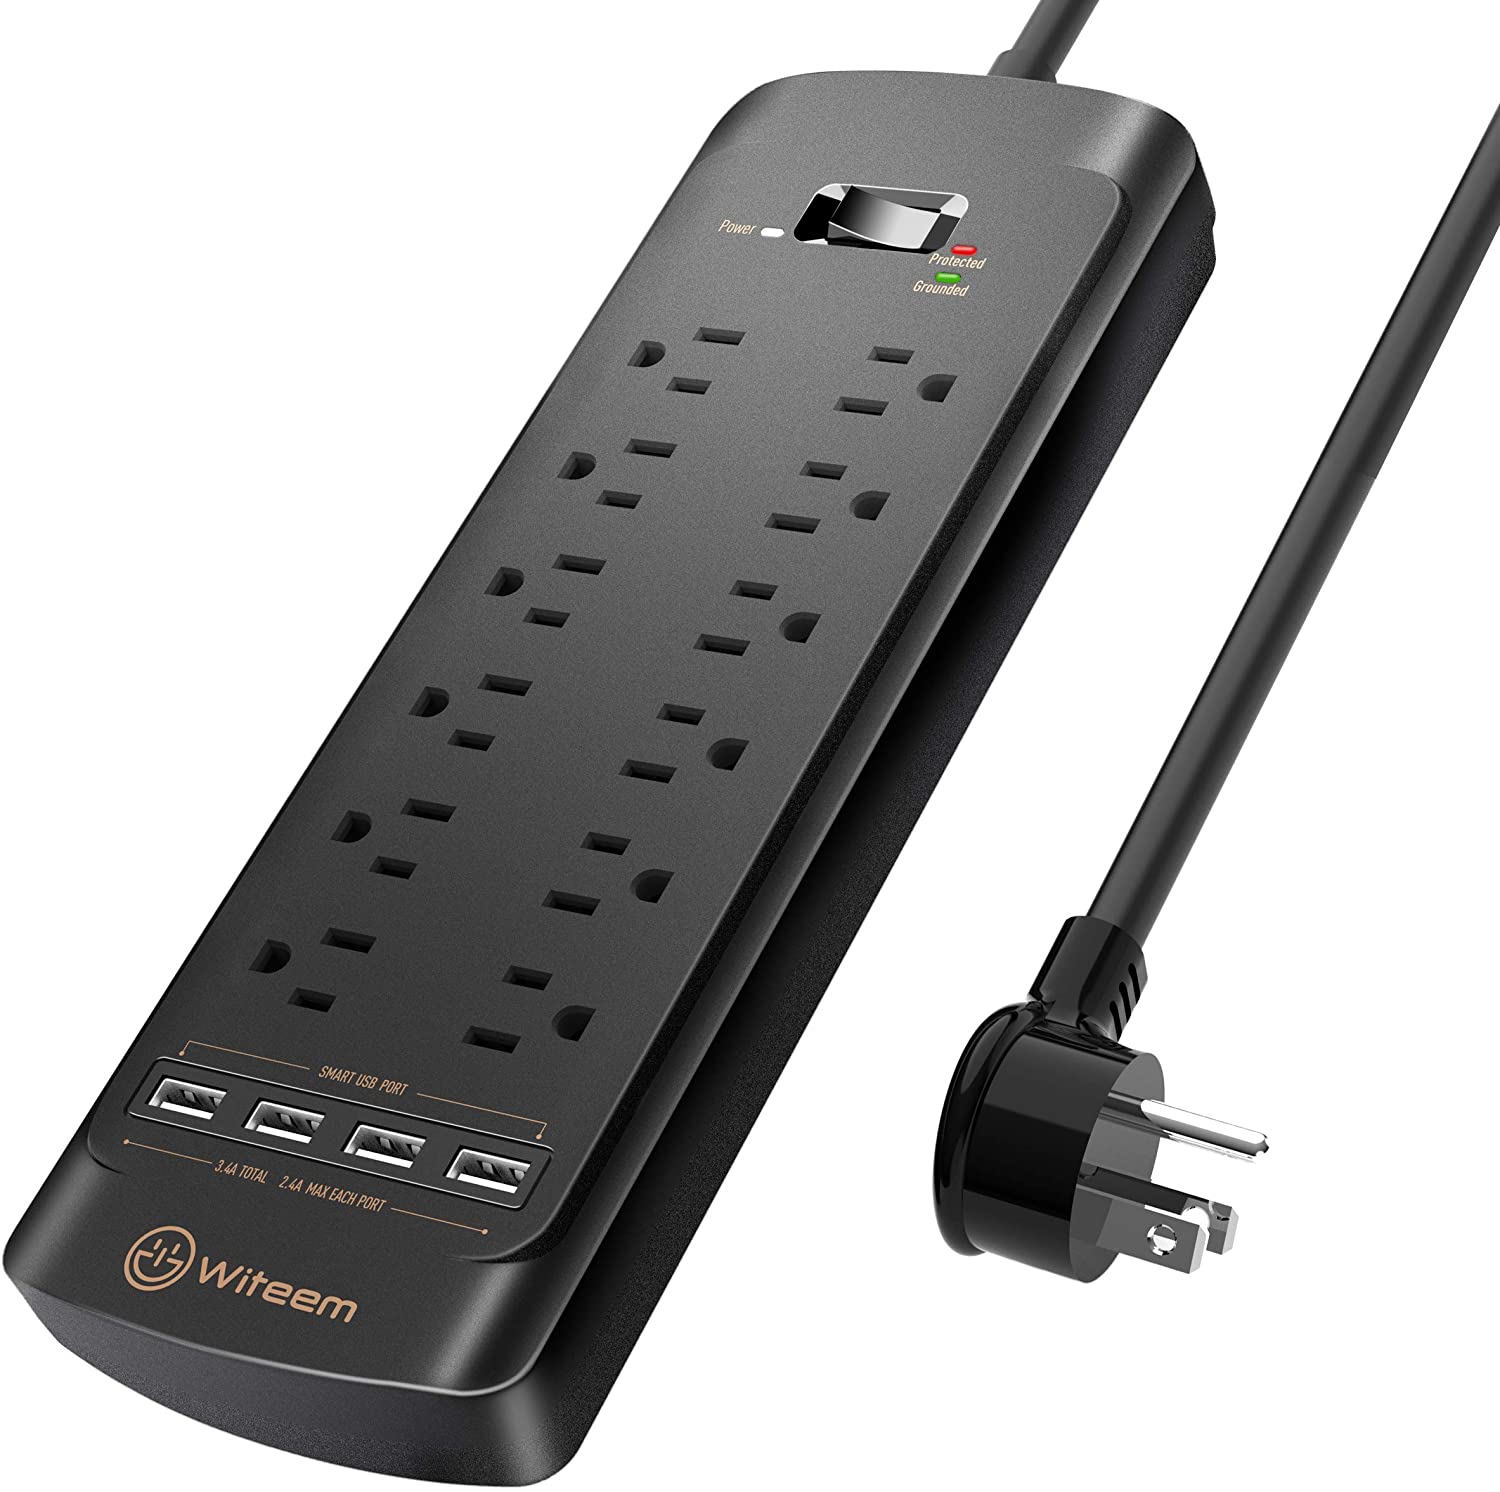 Surge Protector with USB charging ports - Witeem 12 Outlet Power Strip and 4 USB Charging Ports - $16.19 @ Amazon